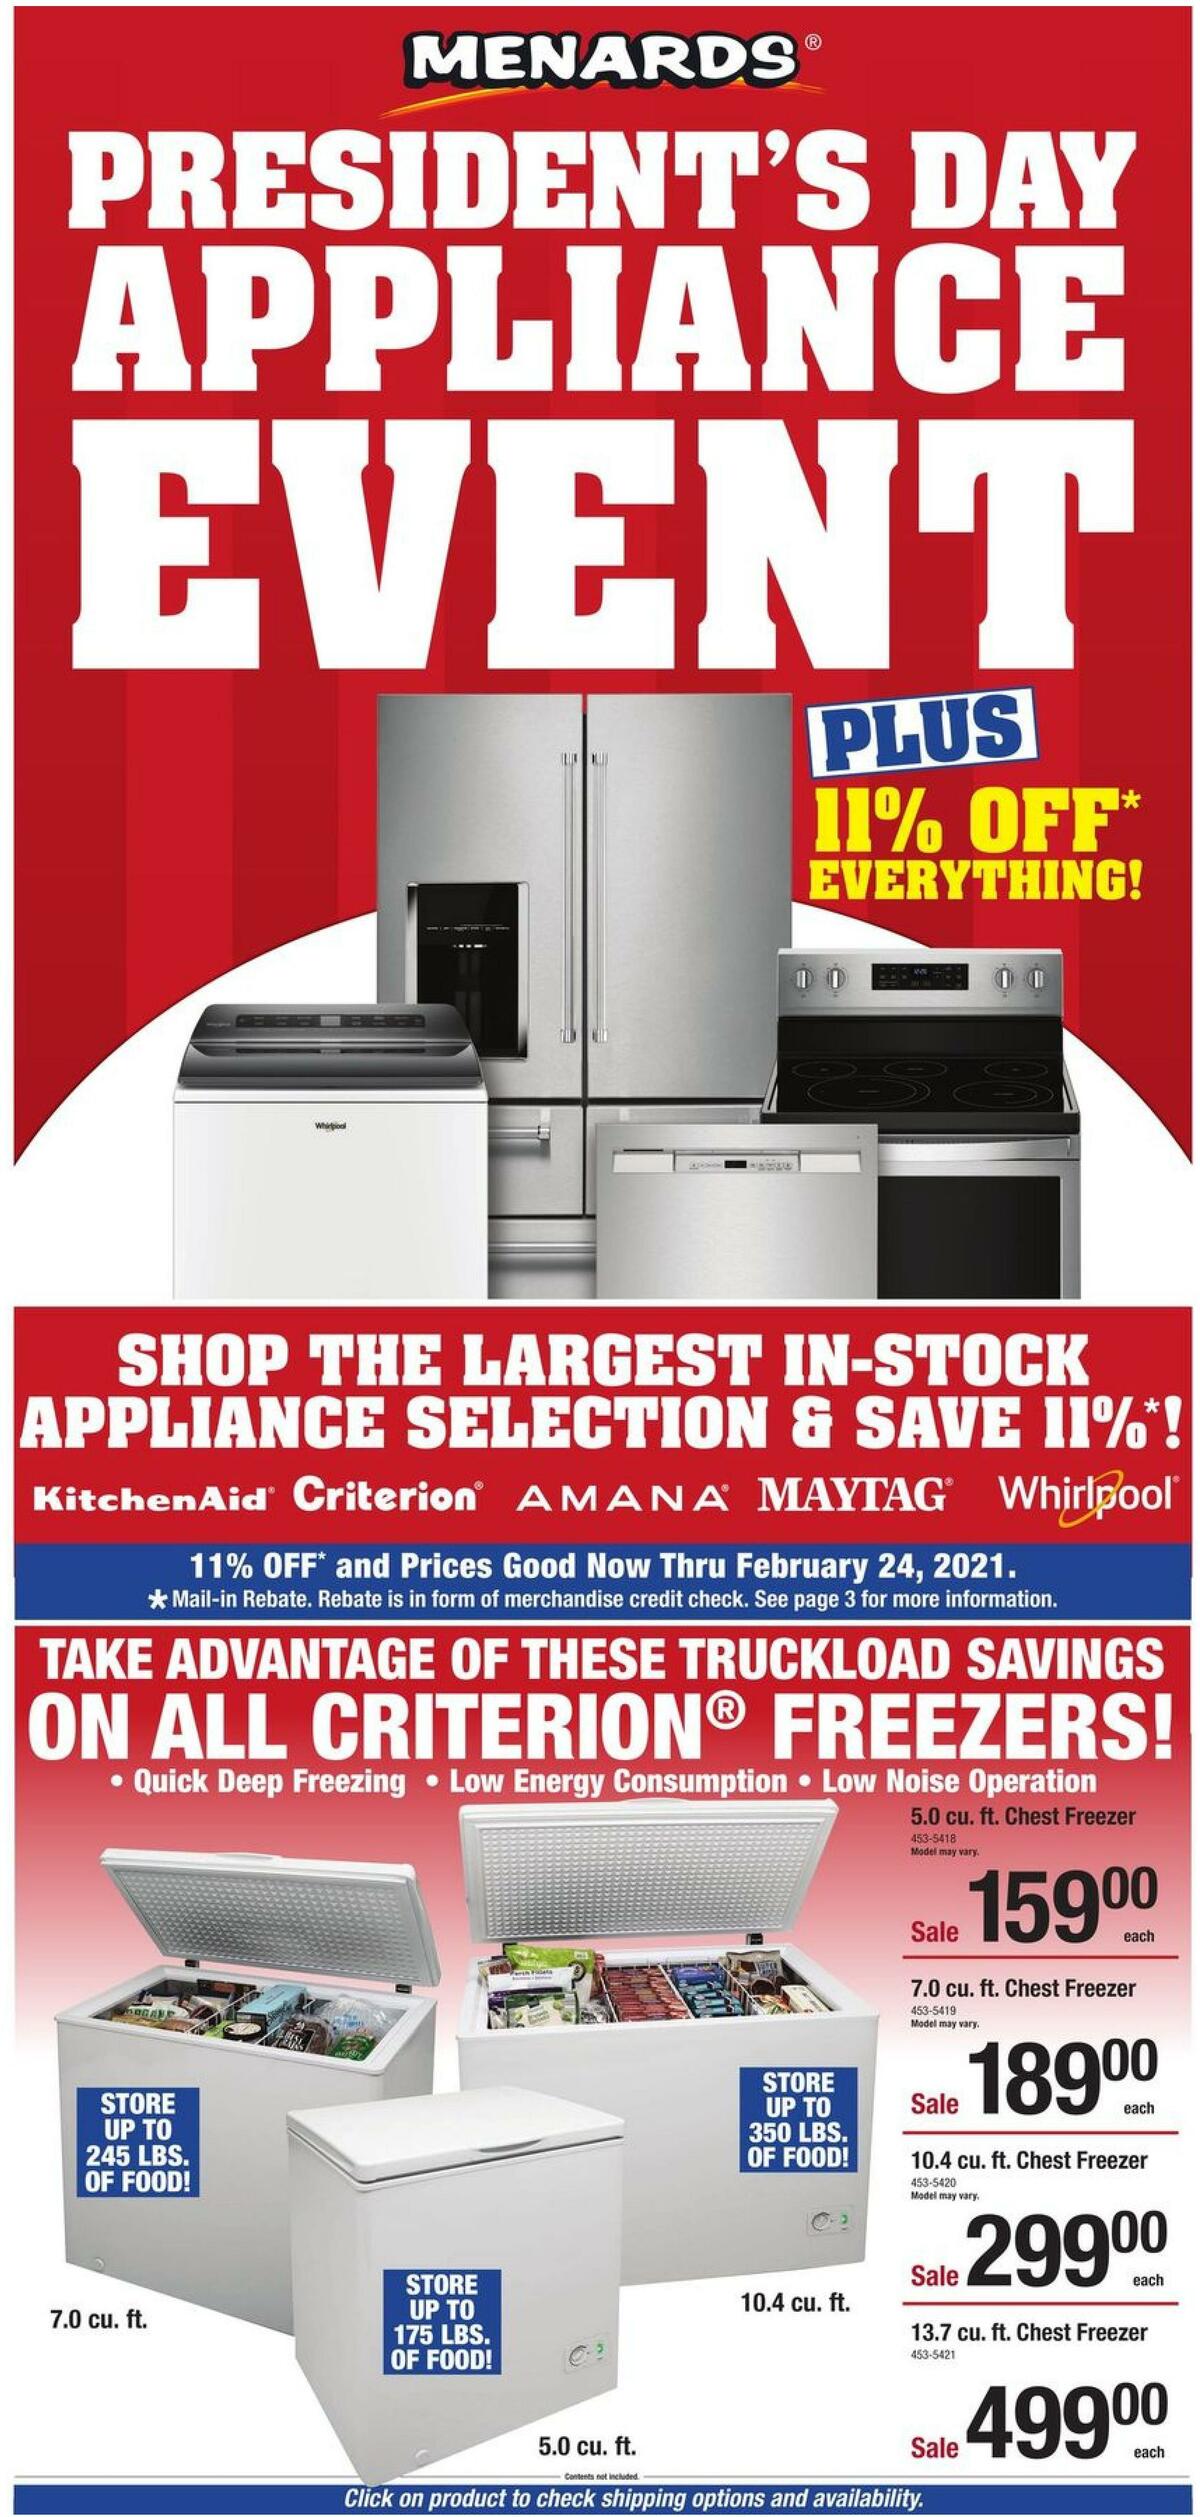 Menards President's Day Appliance Event Weekly Ads & Special Buys from